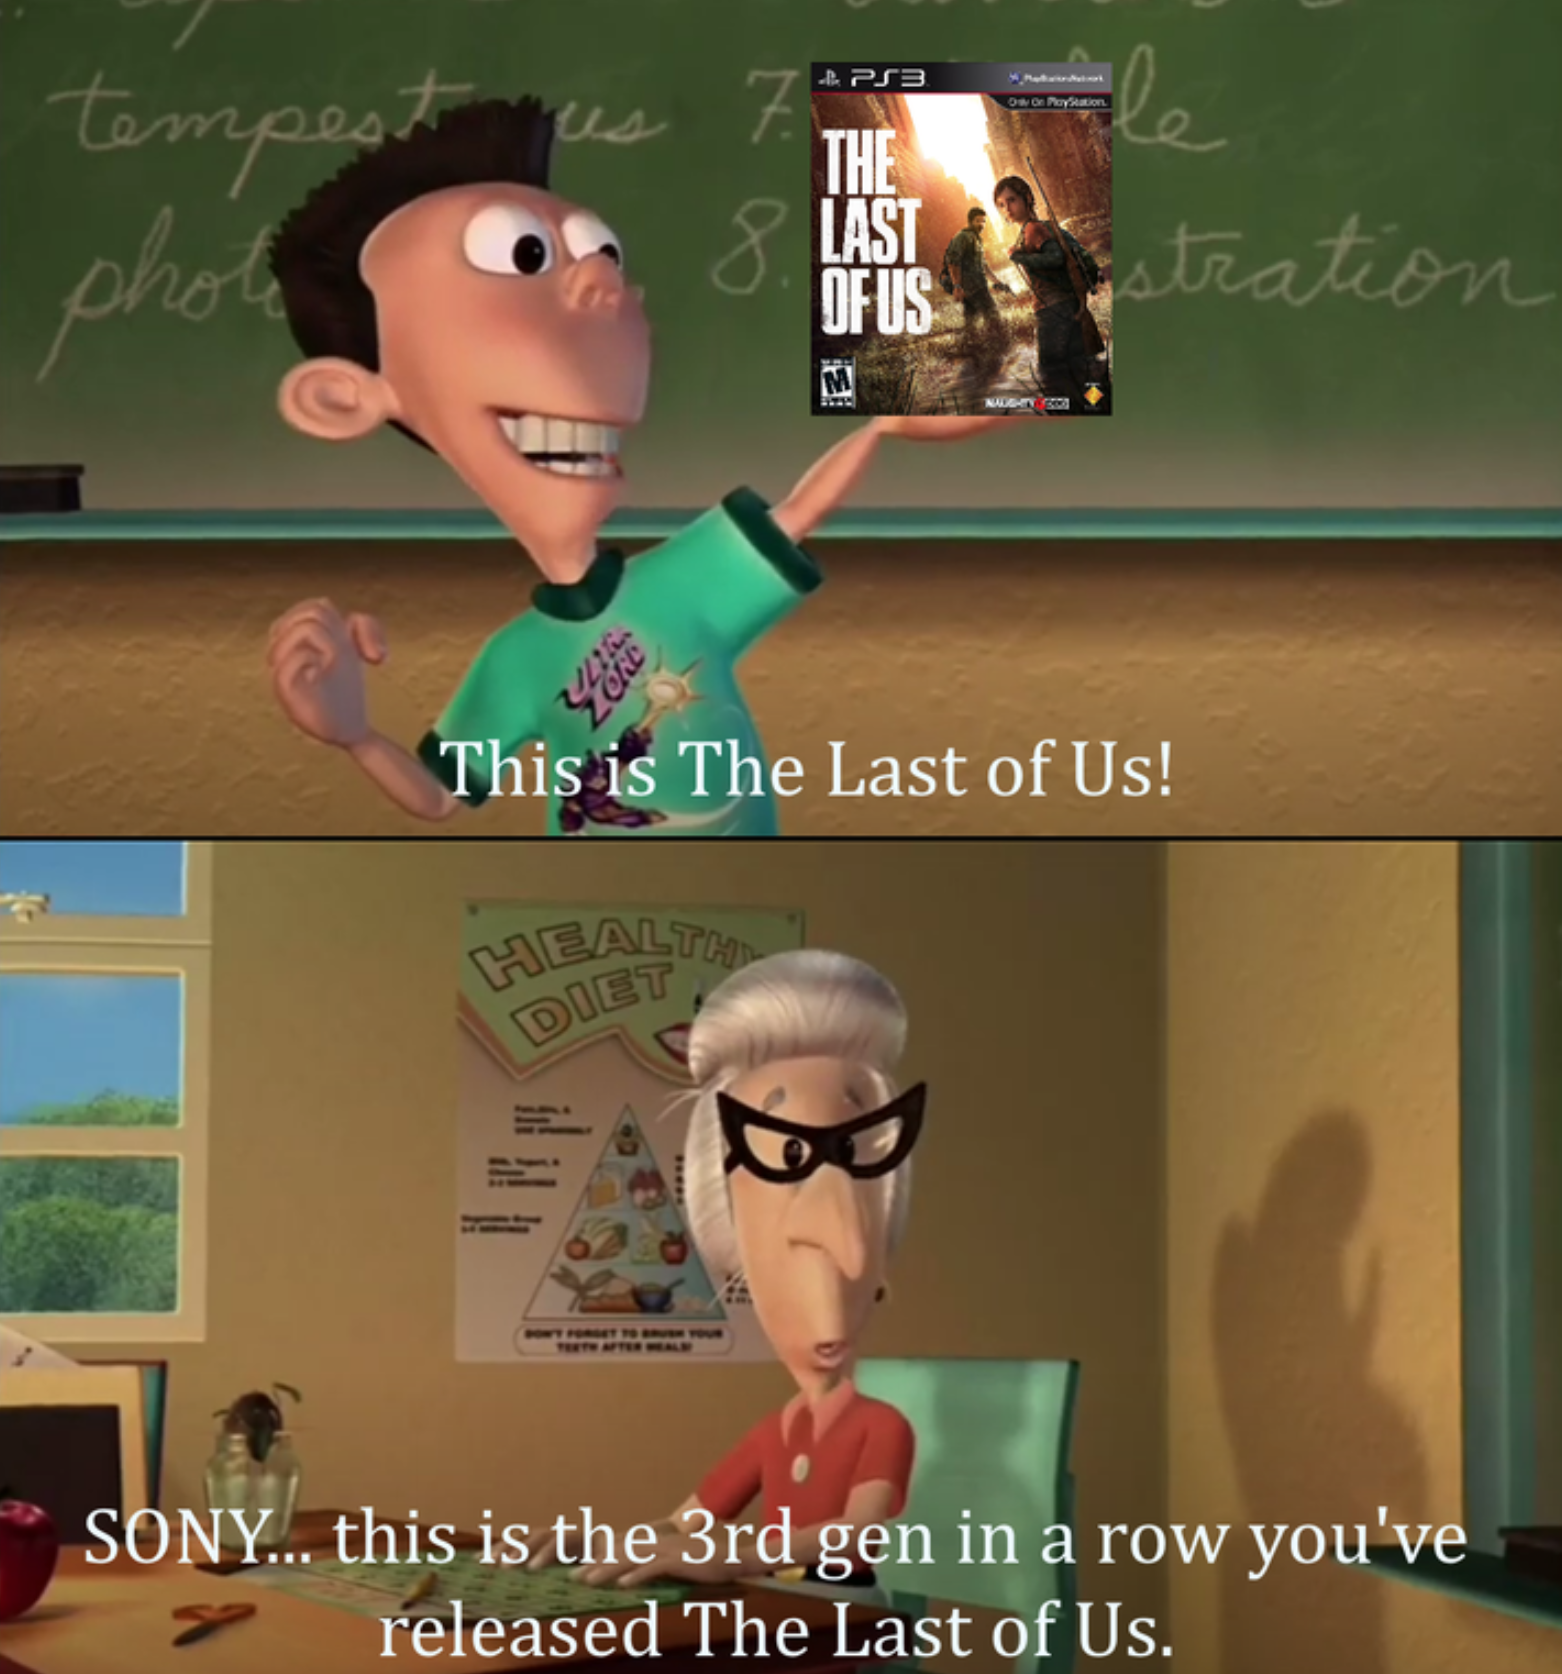 funny gaming memes - jimmy neutron memes - tempest 74 The Ele pholy 8 Last stration Of Us This is The Last of Us! Healt Diet Sony... this is the 3rd gen in a row you've released The Last of Us.